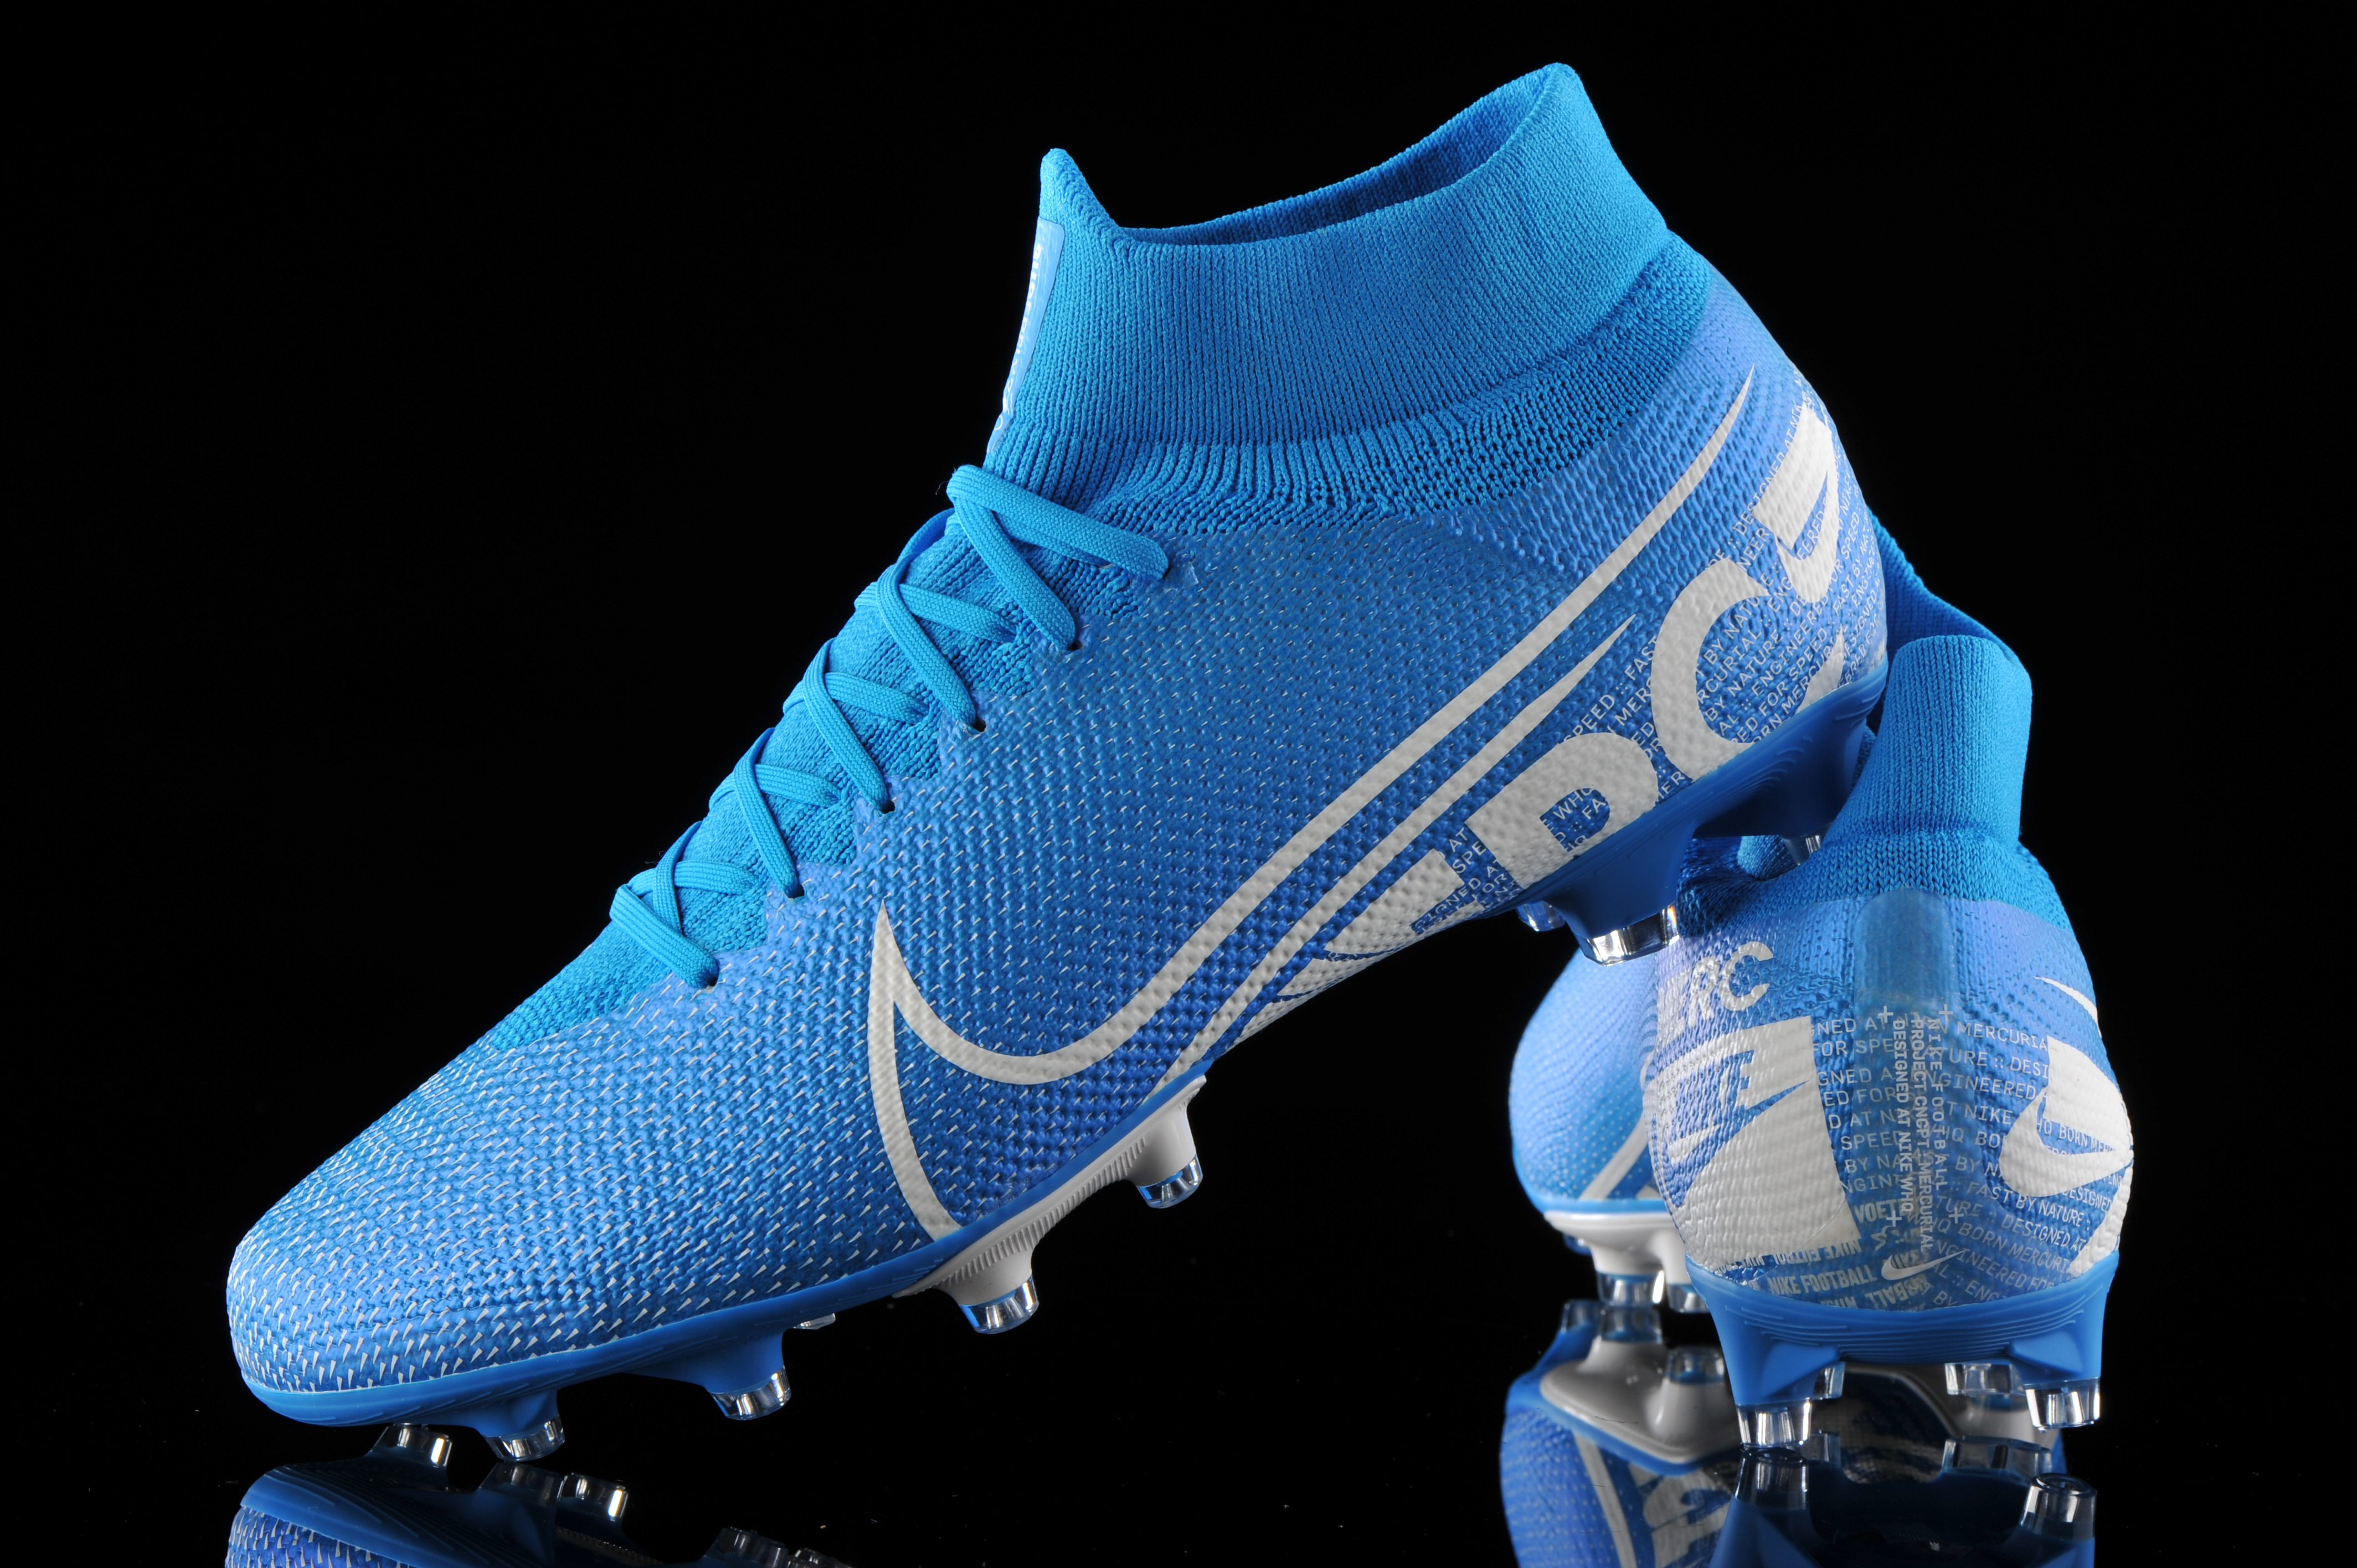 Nike Mercurial Superfly 7 Pro Under The Radar FG Boots.